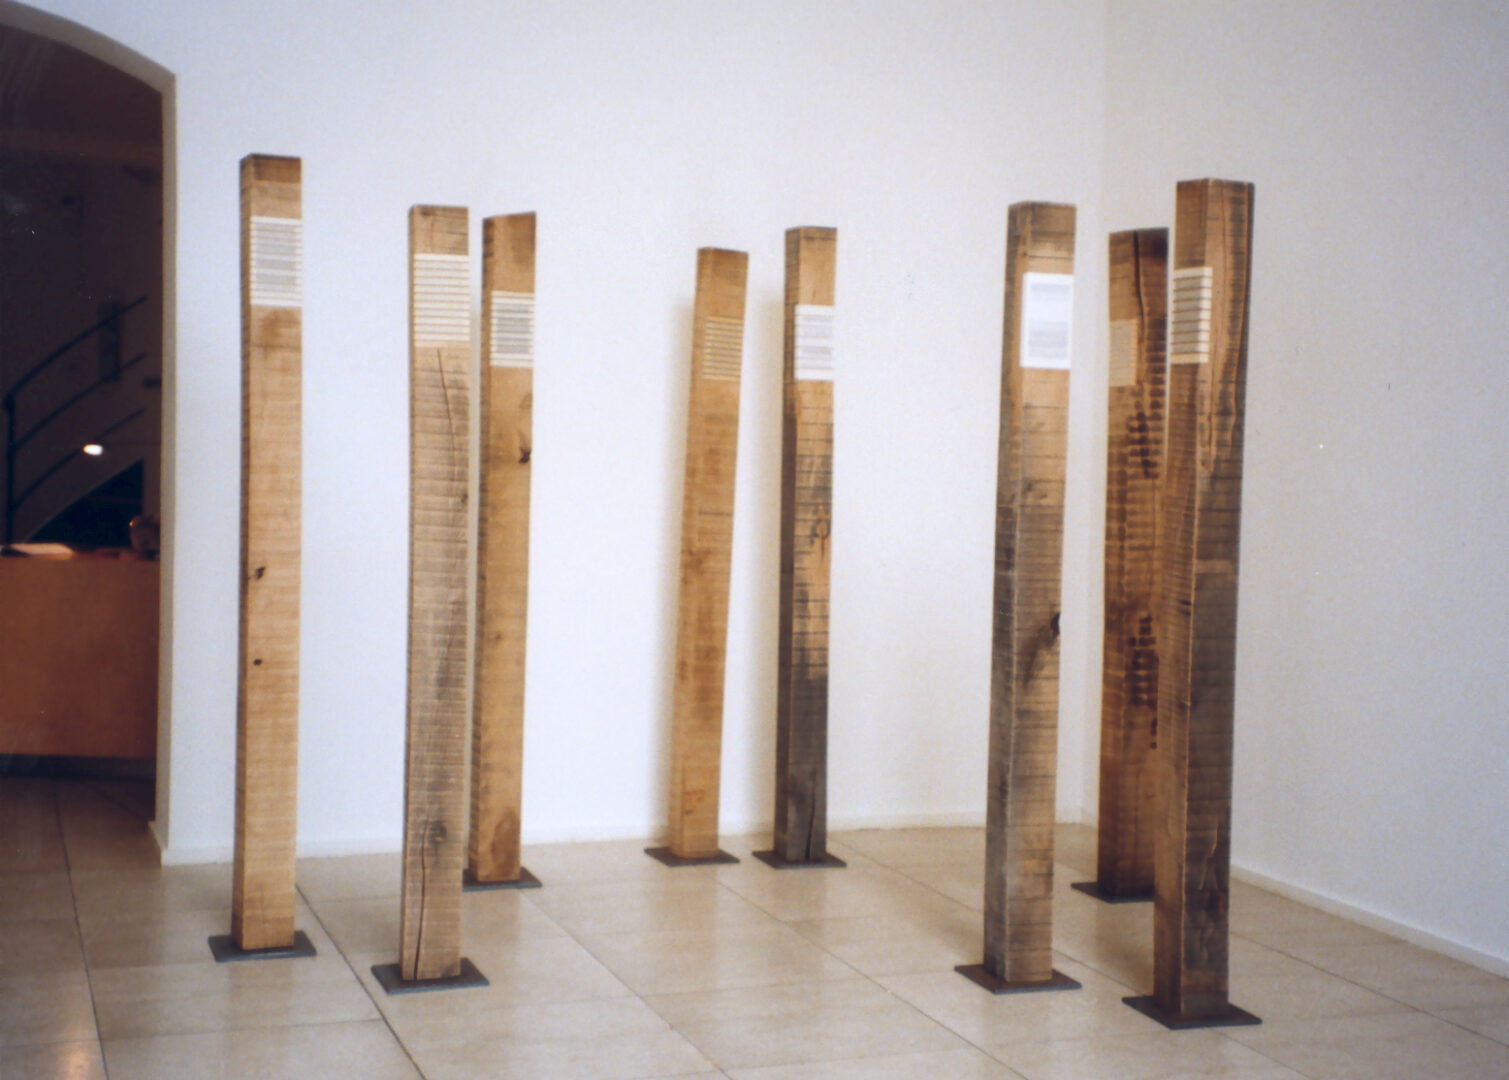 Group of Bookboards,exhibition view 1999